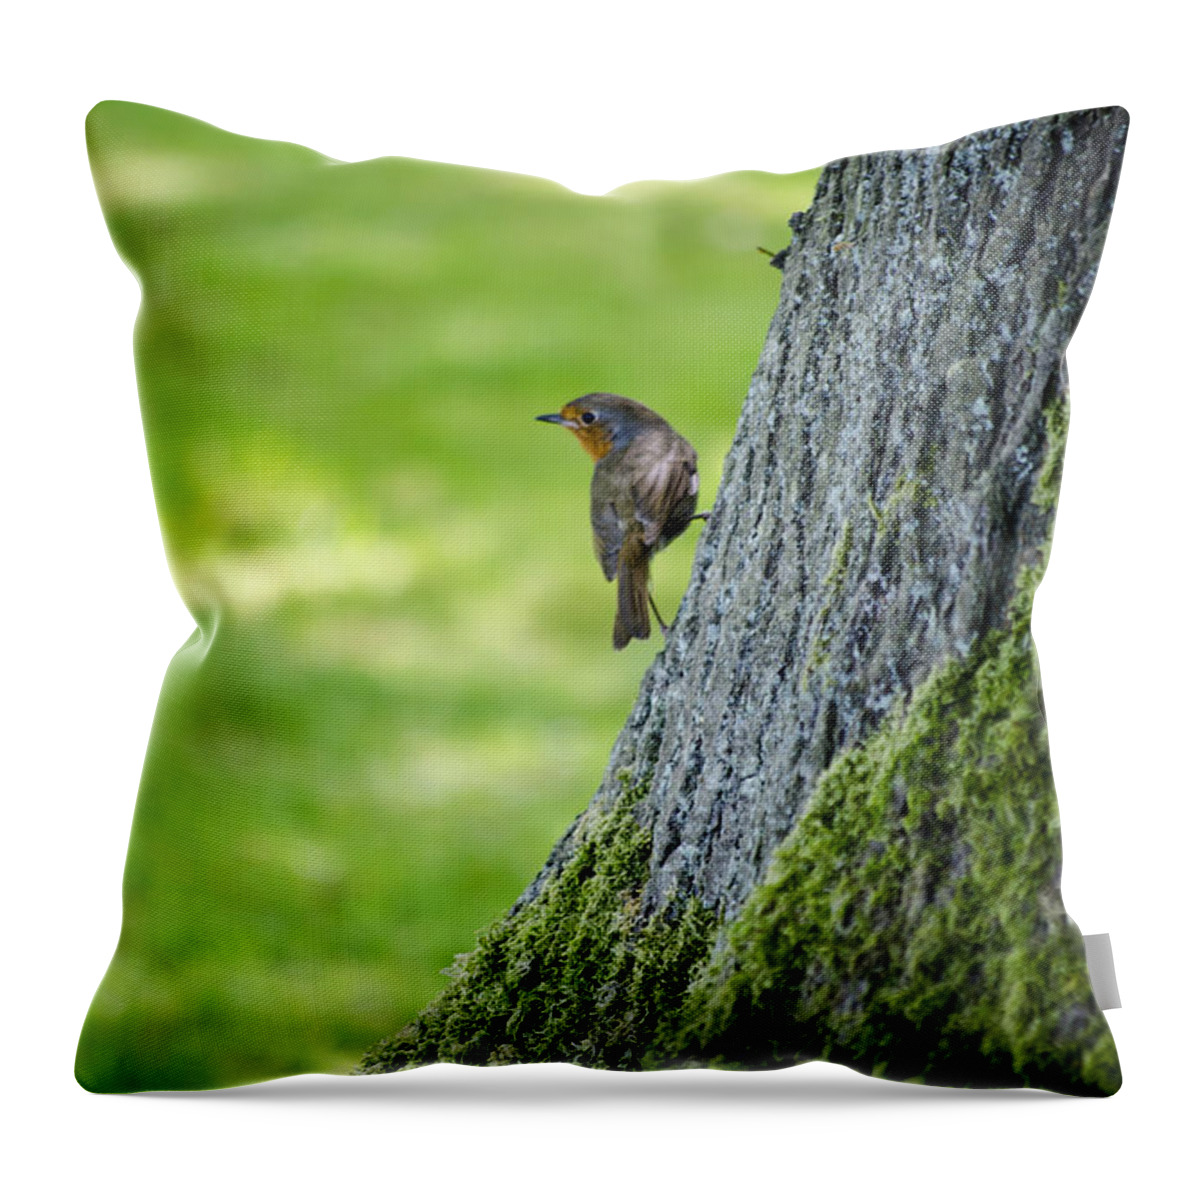 Garden Throw Pillow featuring the photograph Robin At Rest by Spikey Mouse Photography